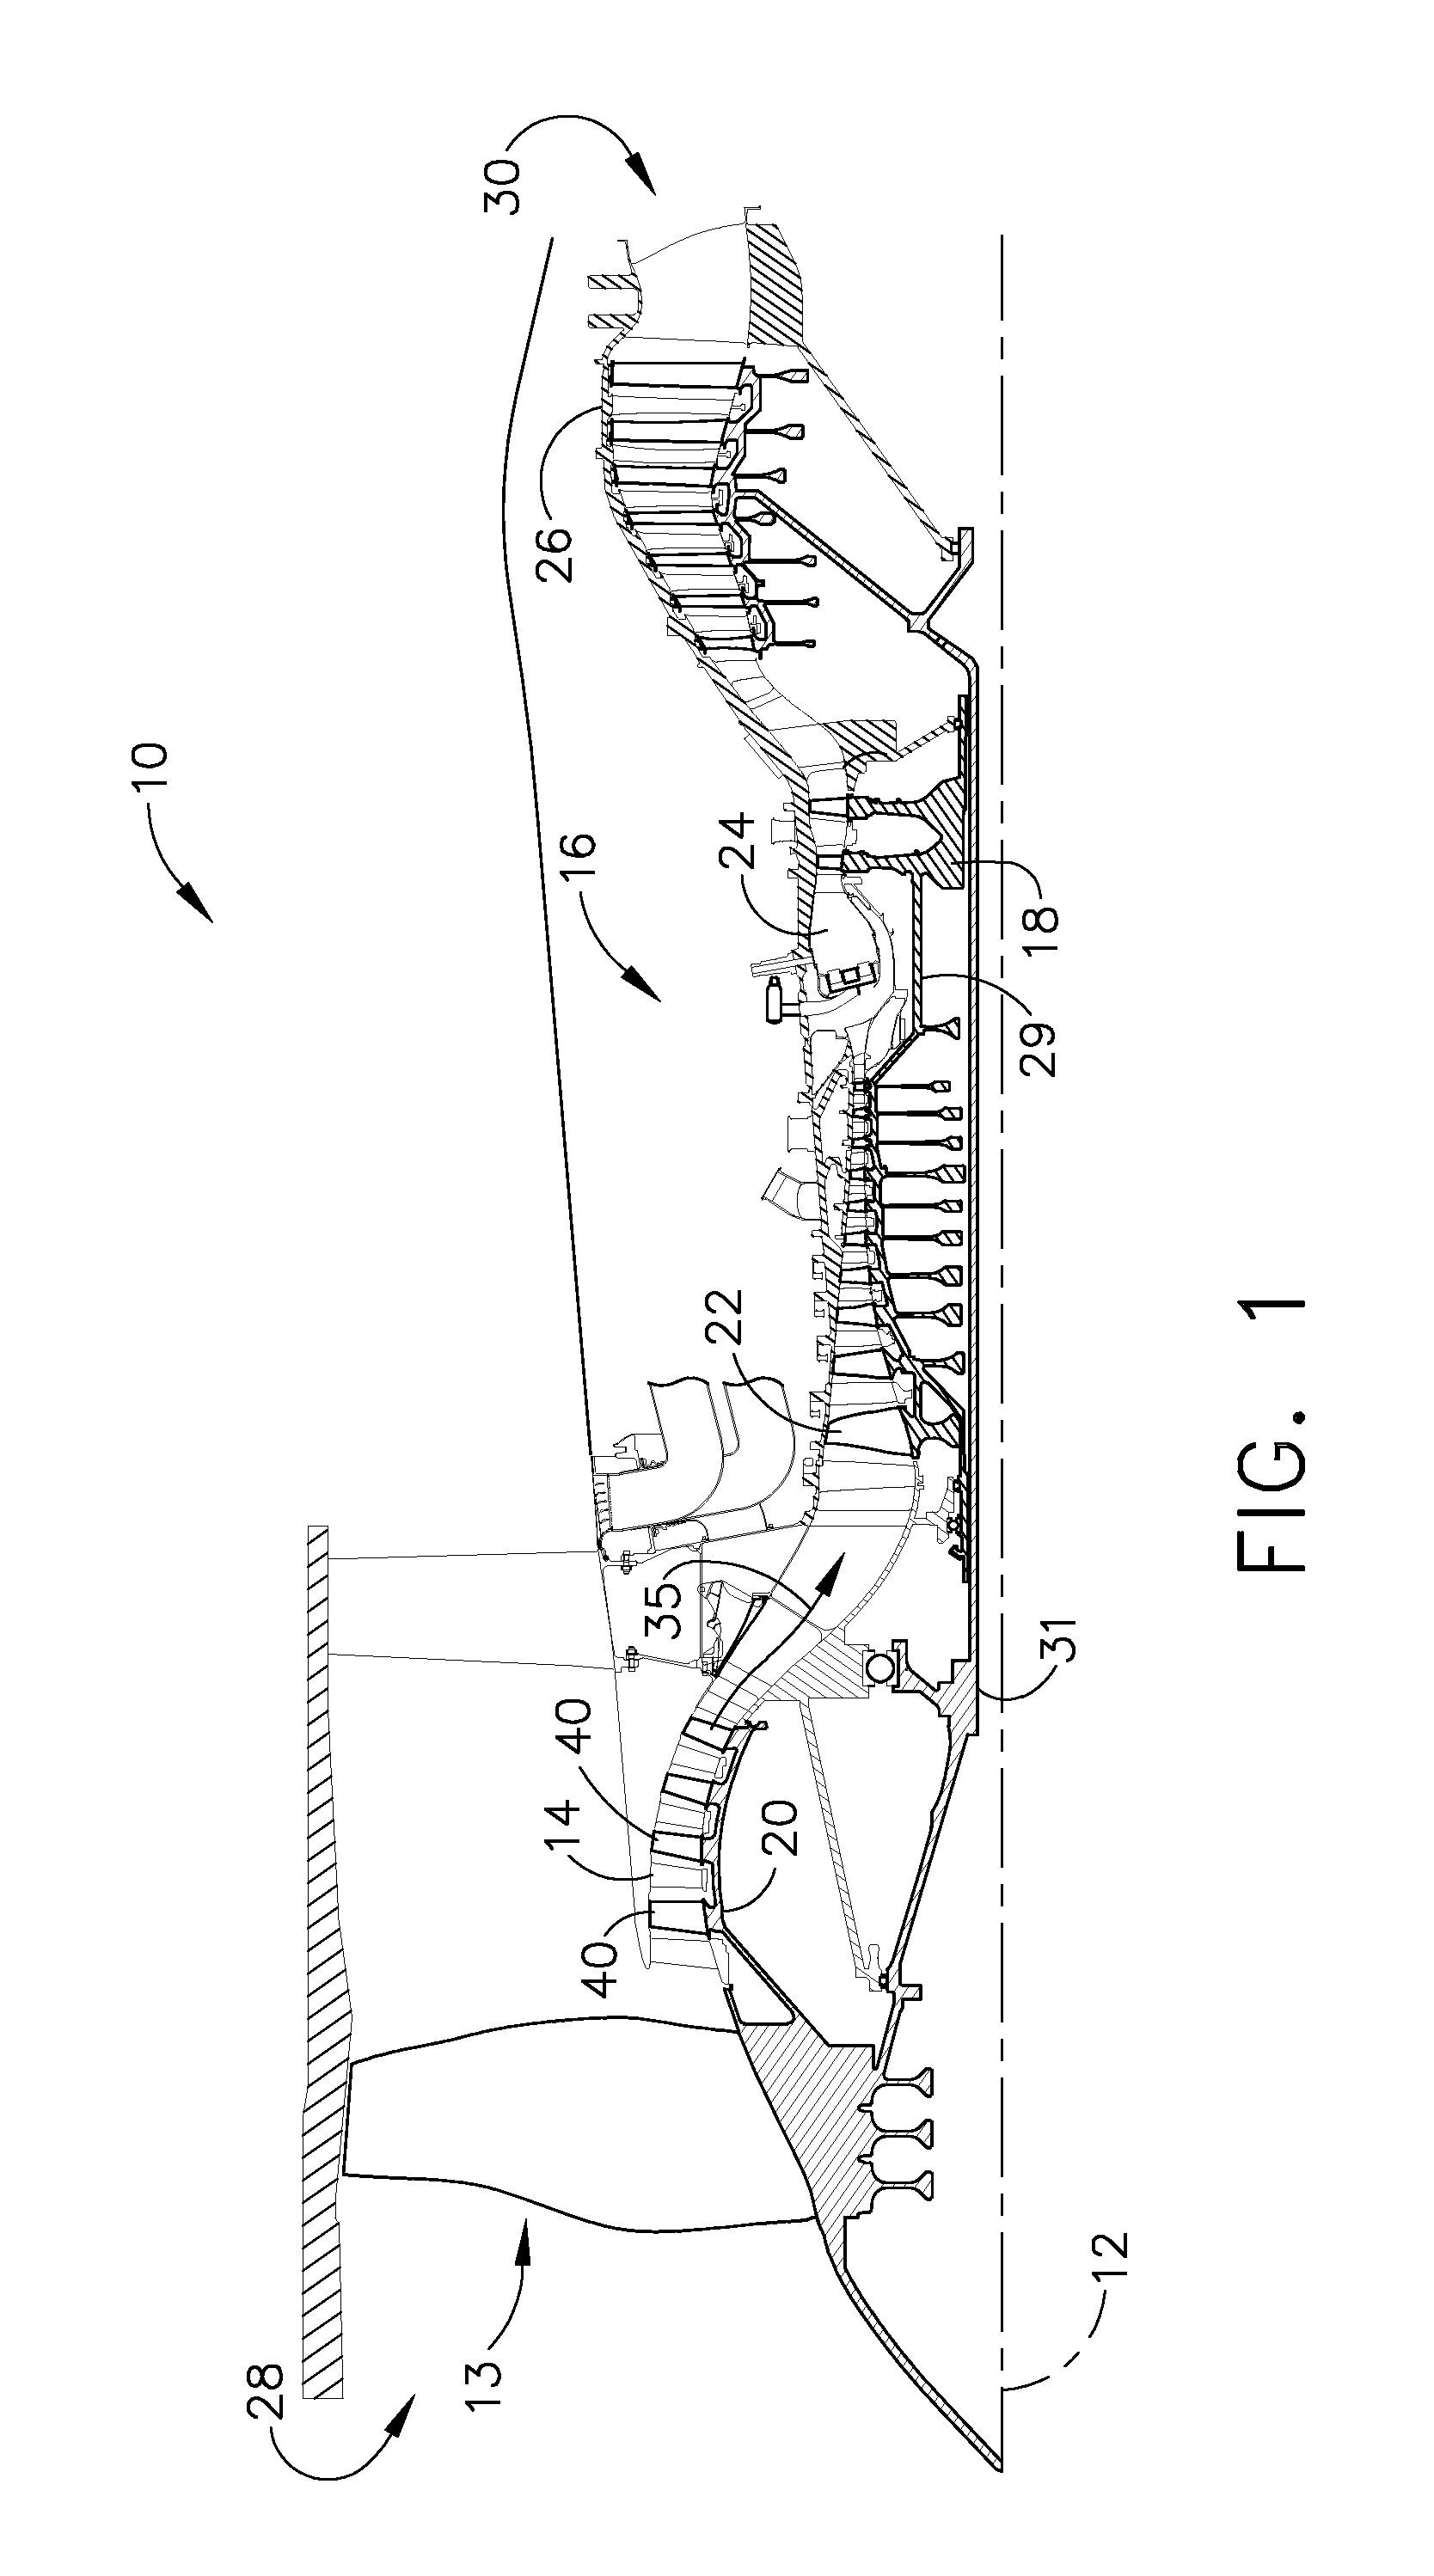 Methods and apparatus for fabricating a rotor assembly